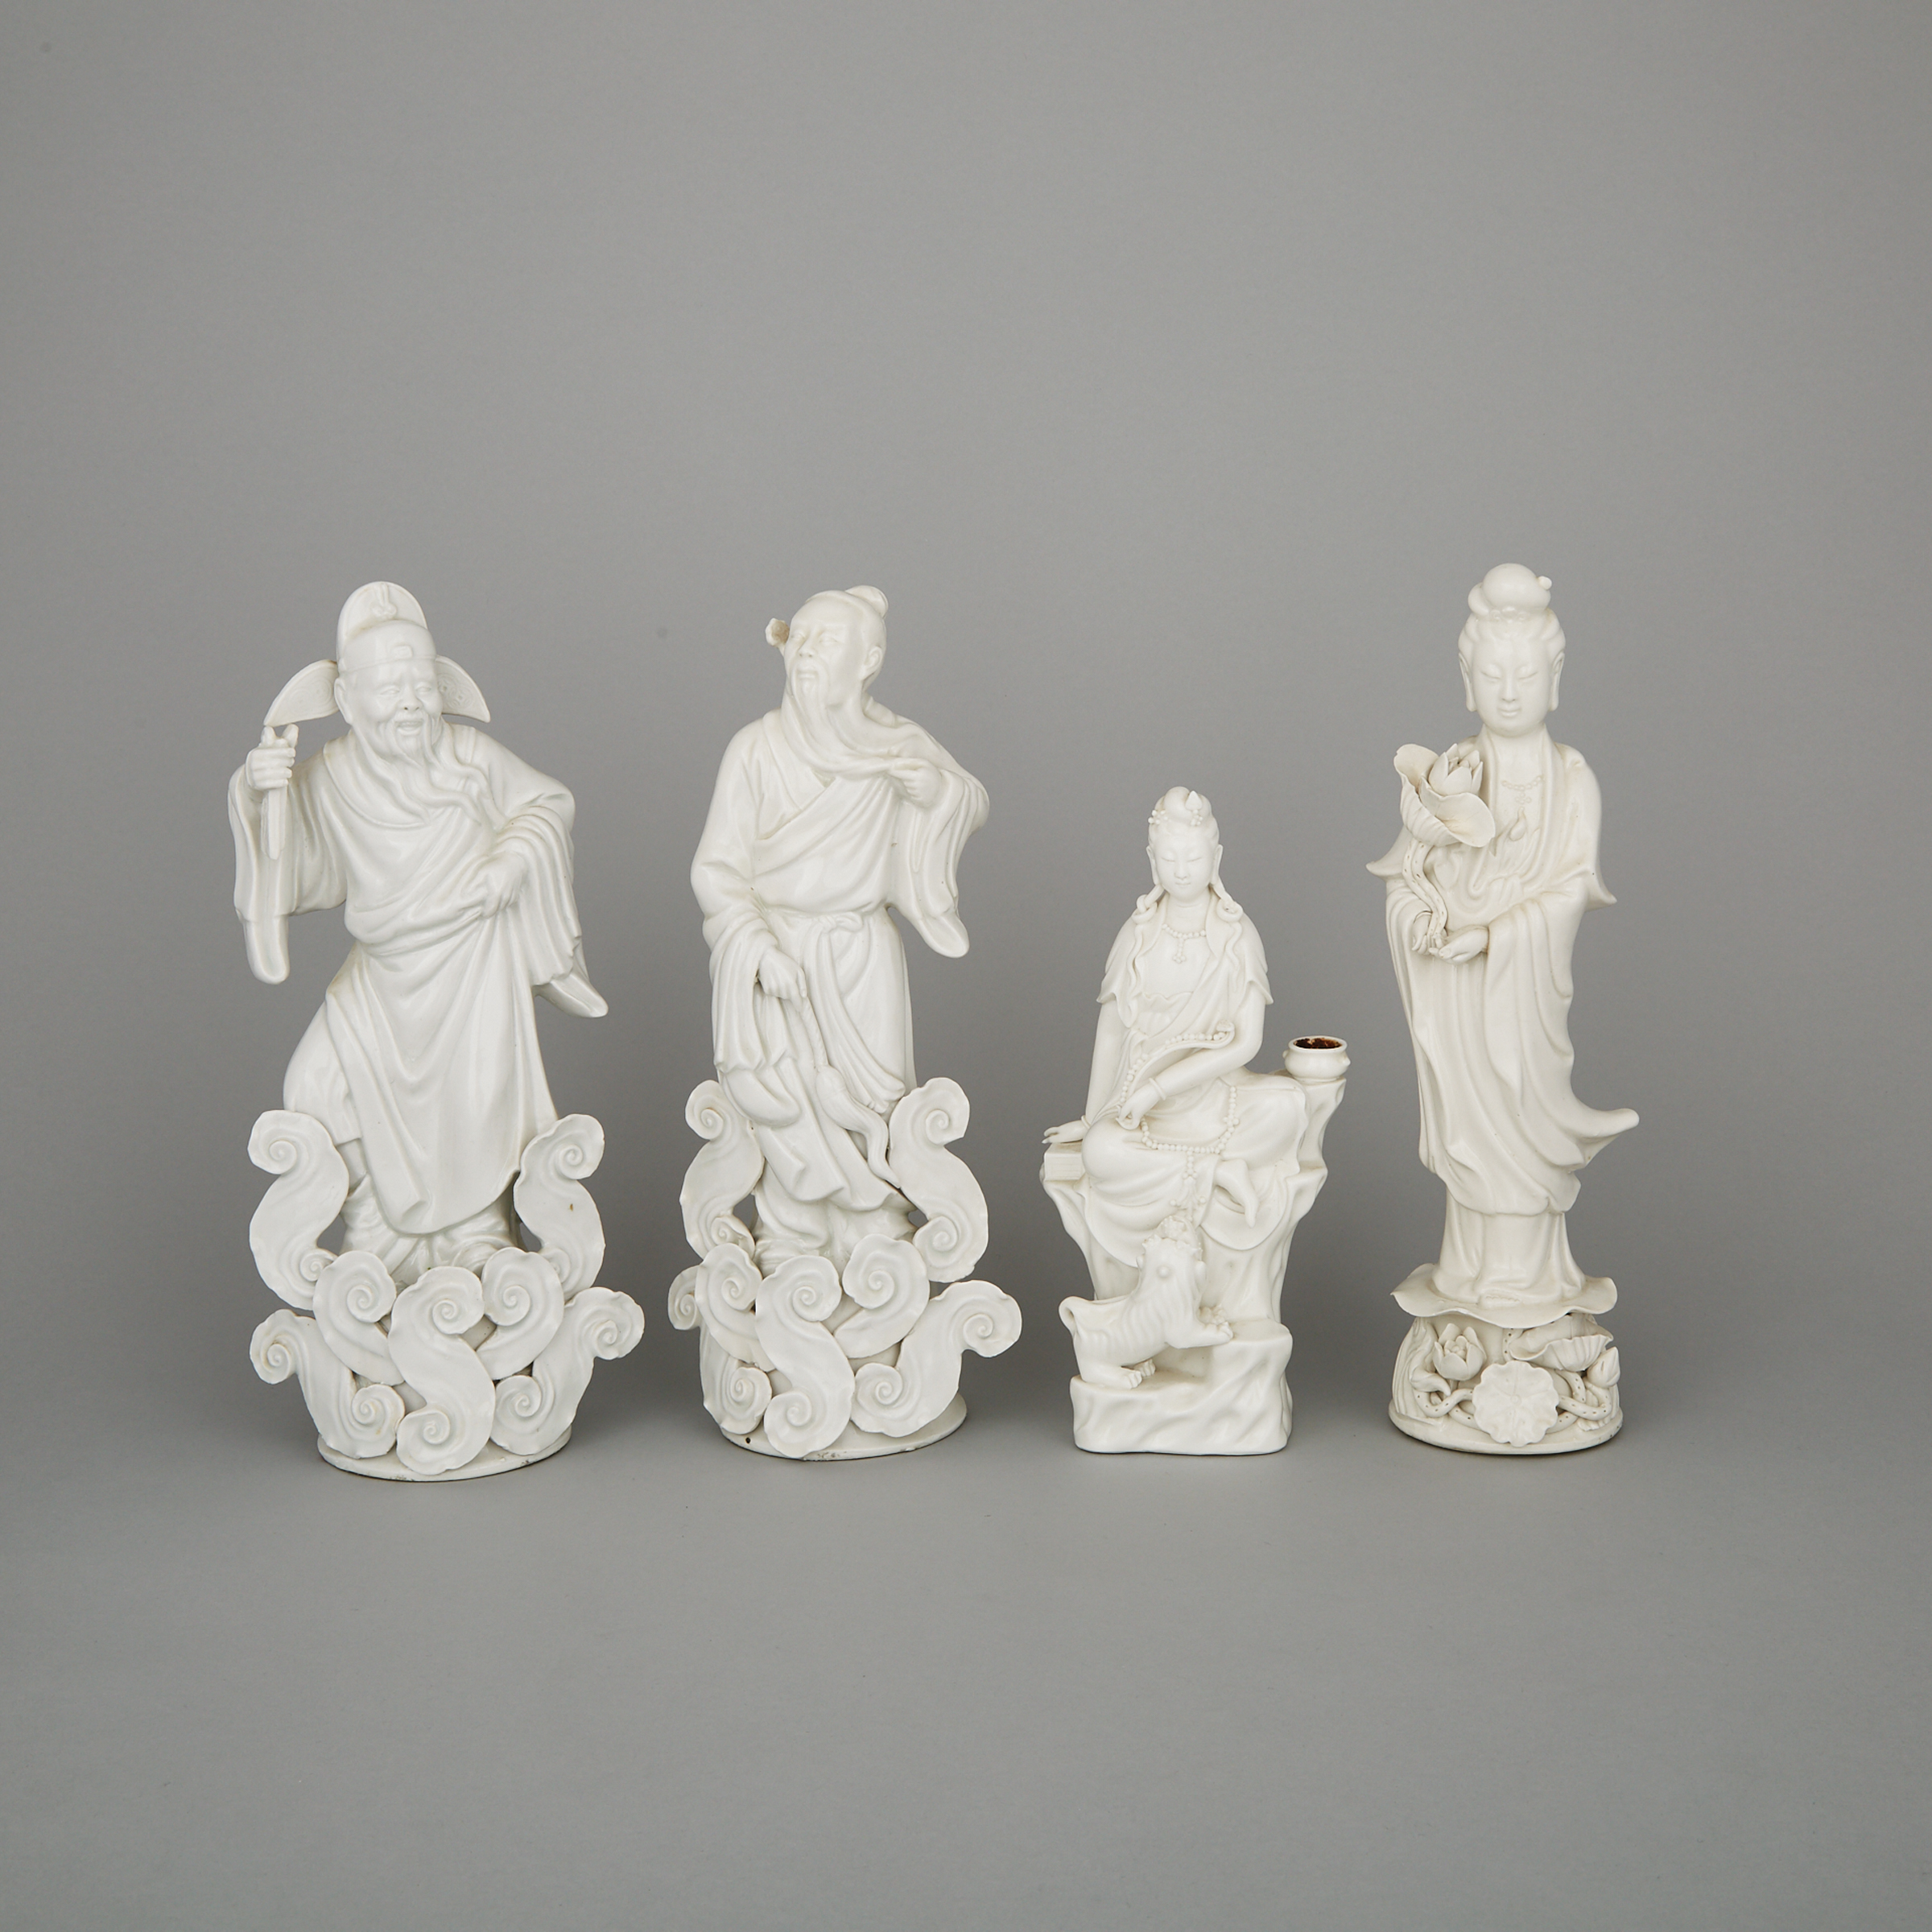 A Group of Four Blanc de Chine Figures, Mid 20th Century